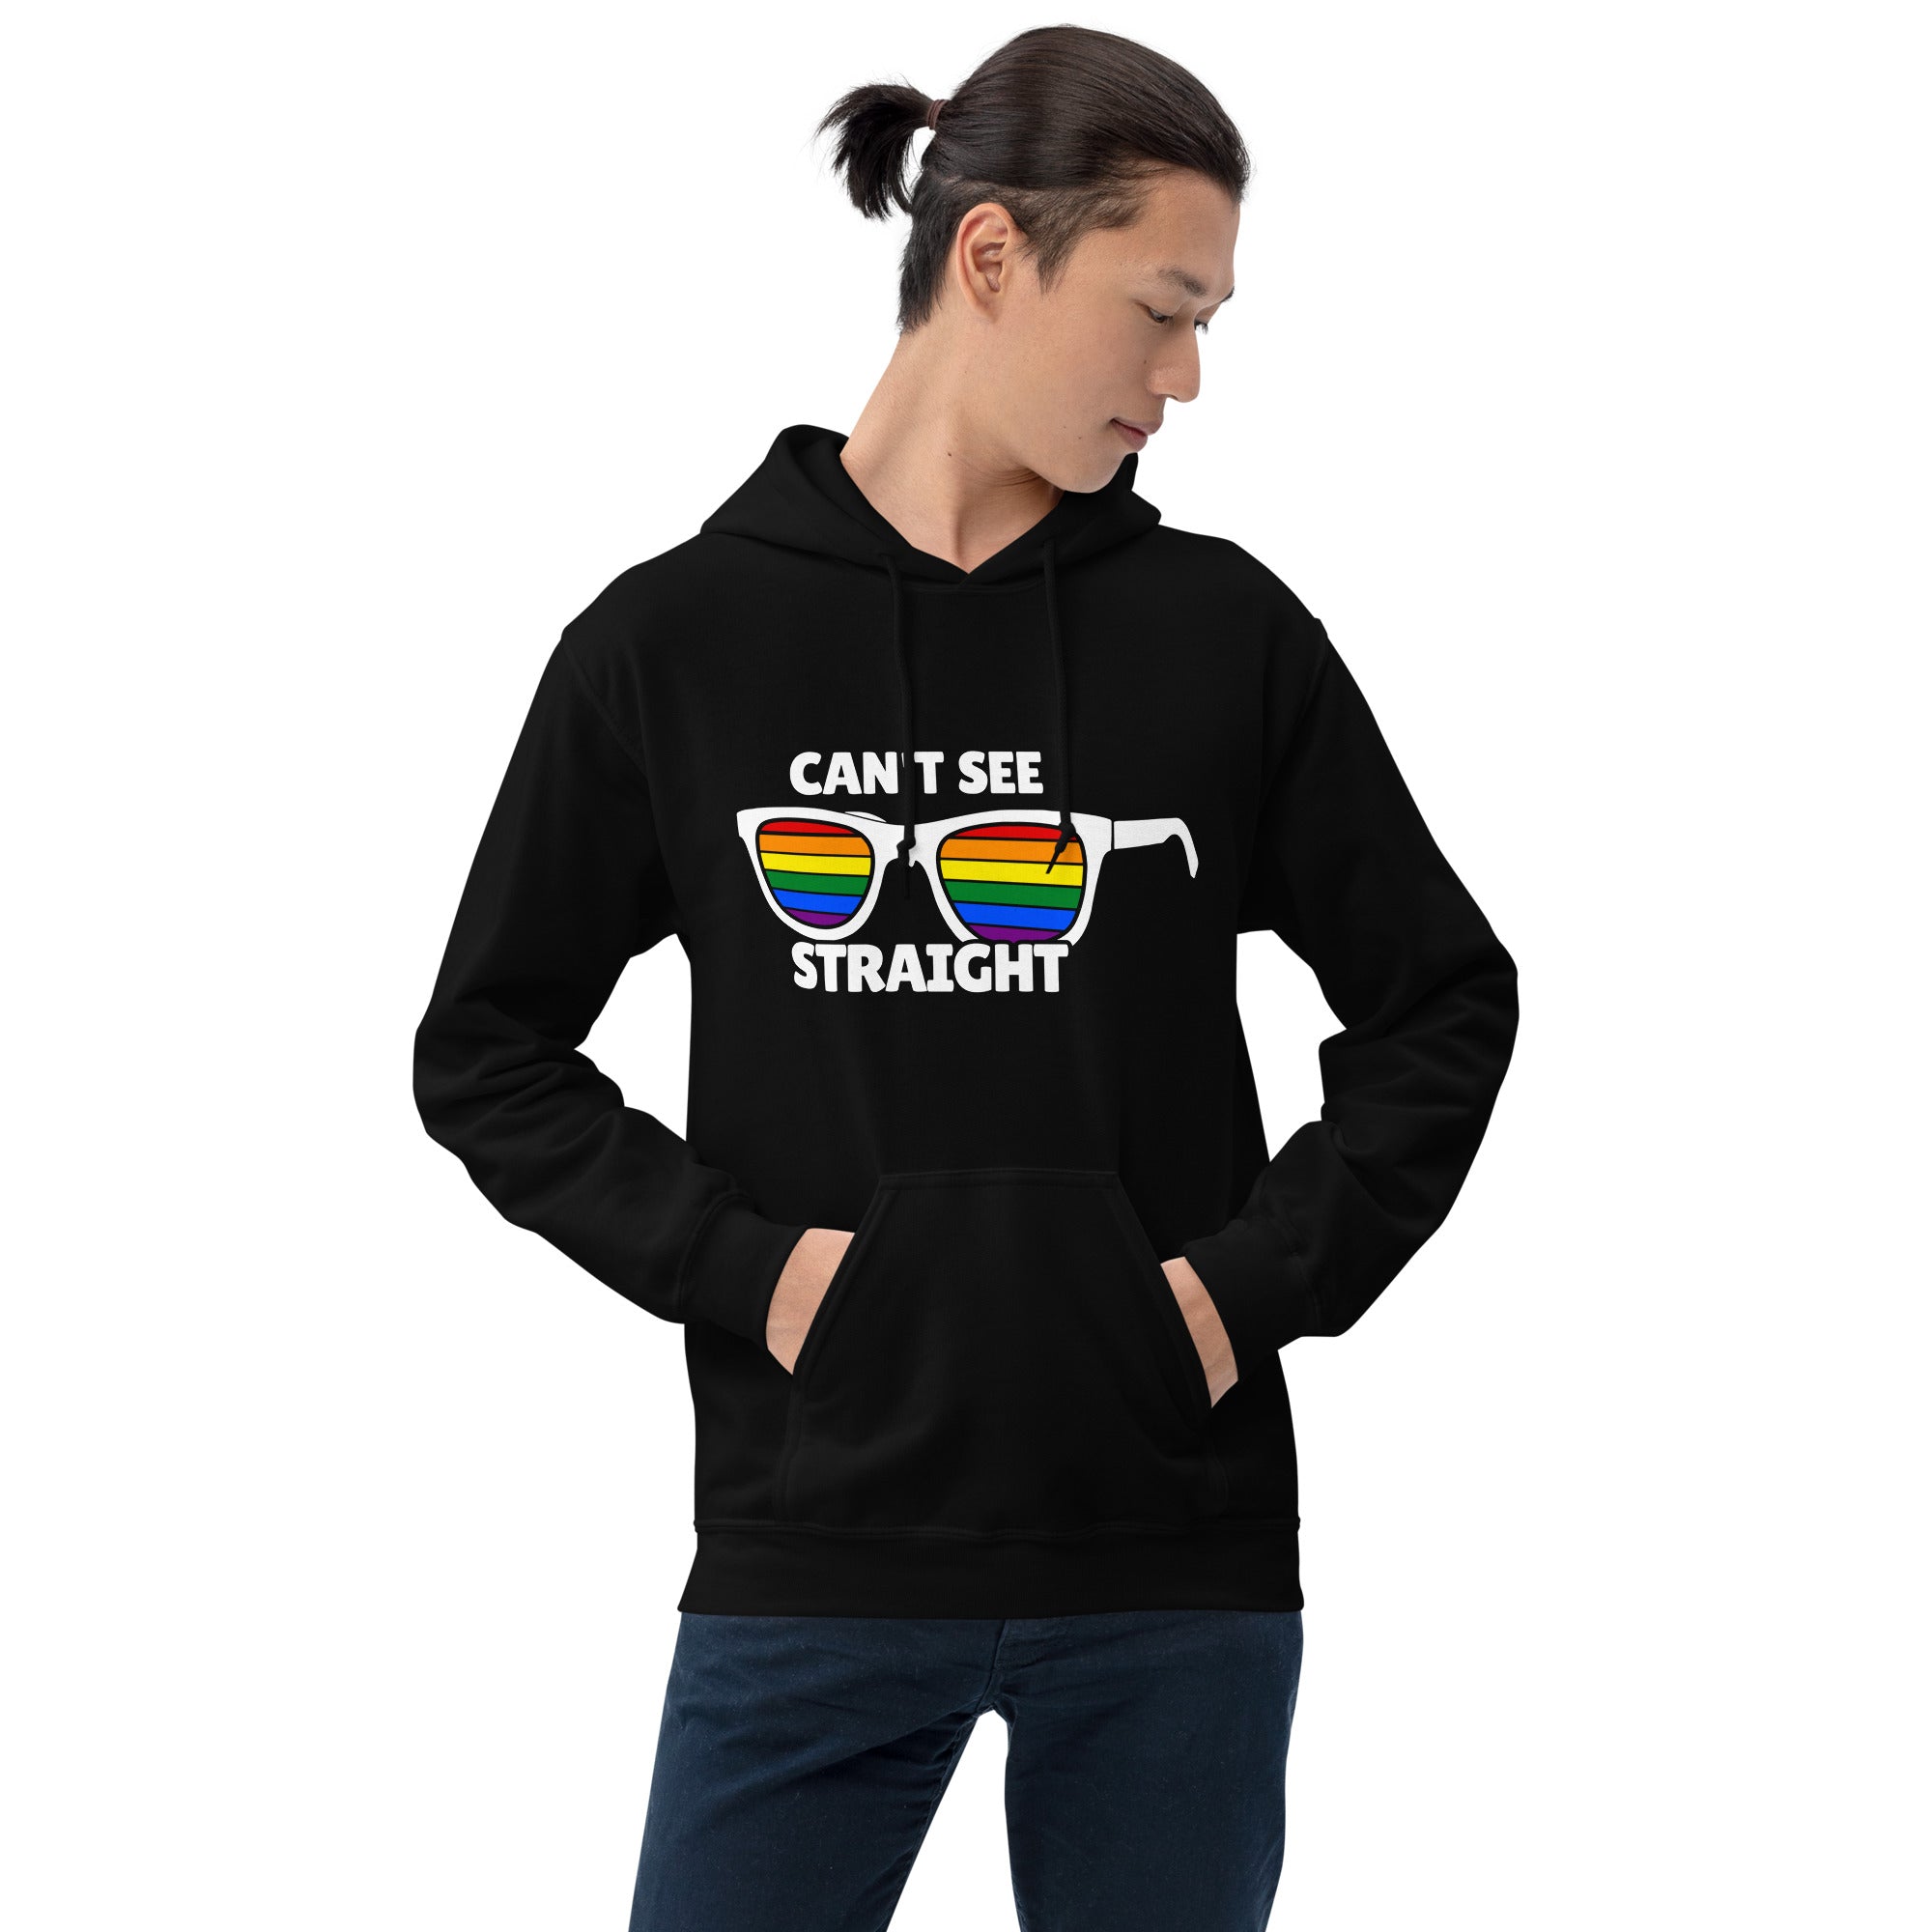 I Can't See Straight - Unisex Hoodie